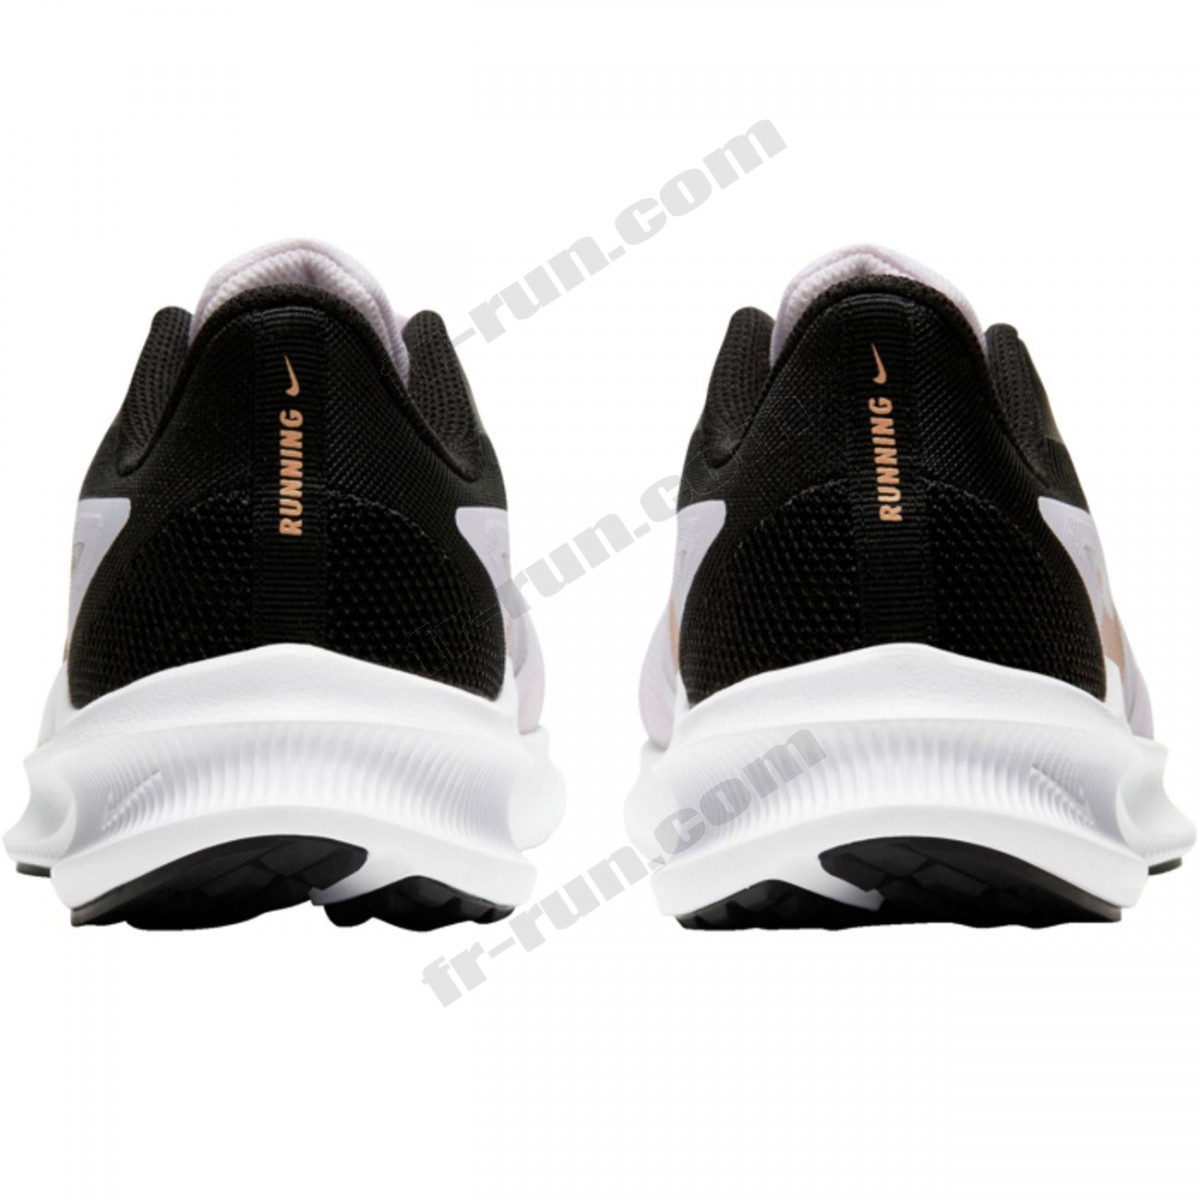 Nike/CHAUSSURES BASSES running femme NIKE NIKE DOWNSHIFTER 10 W √ Nouveau style √ Soldes - -2